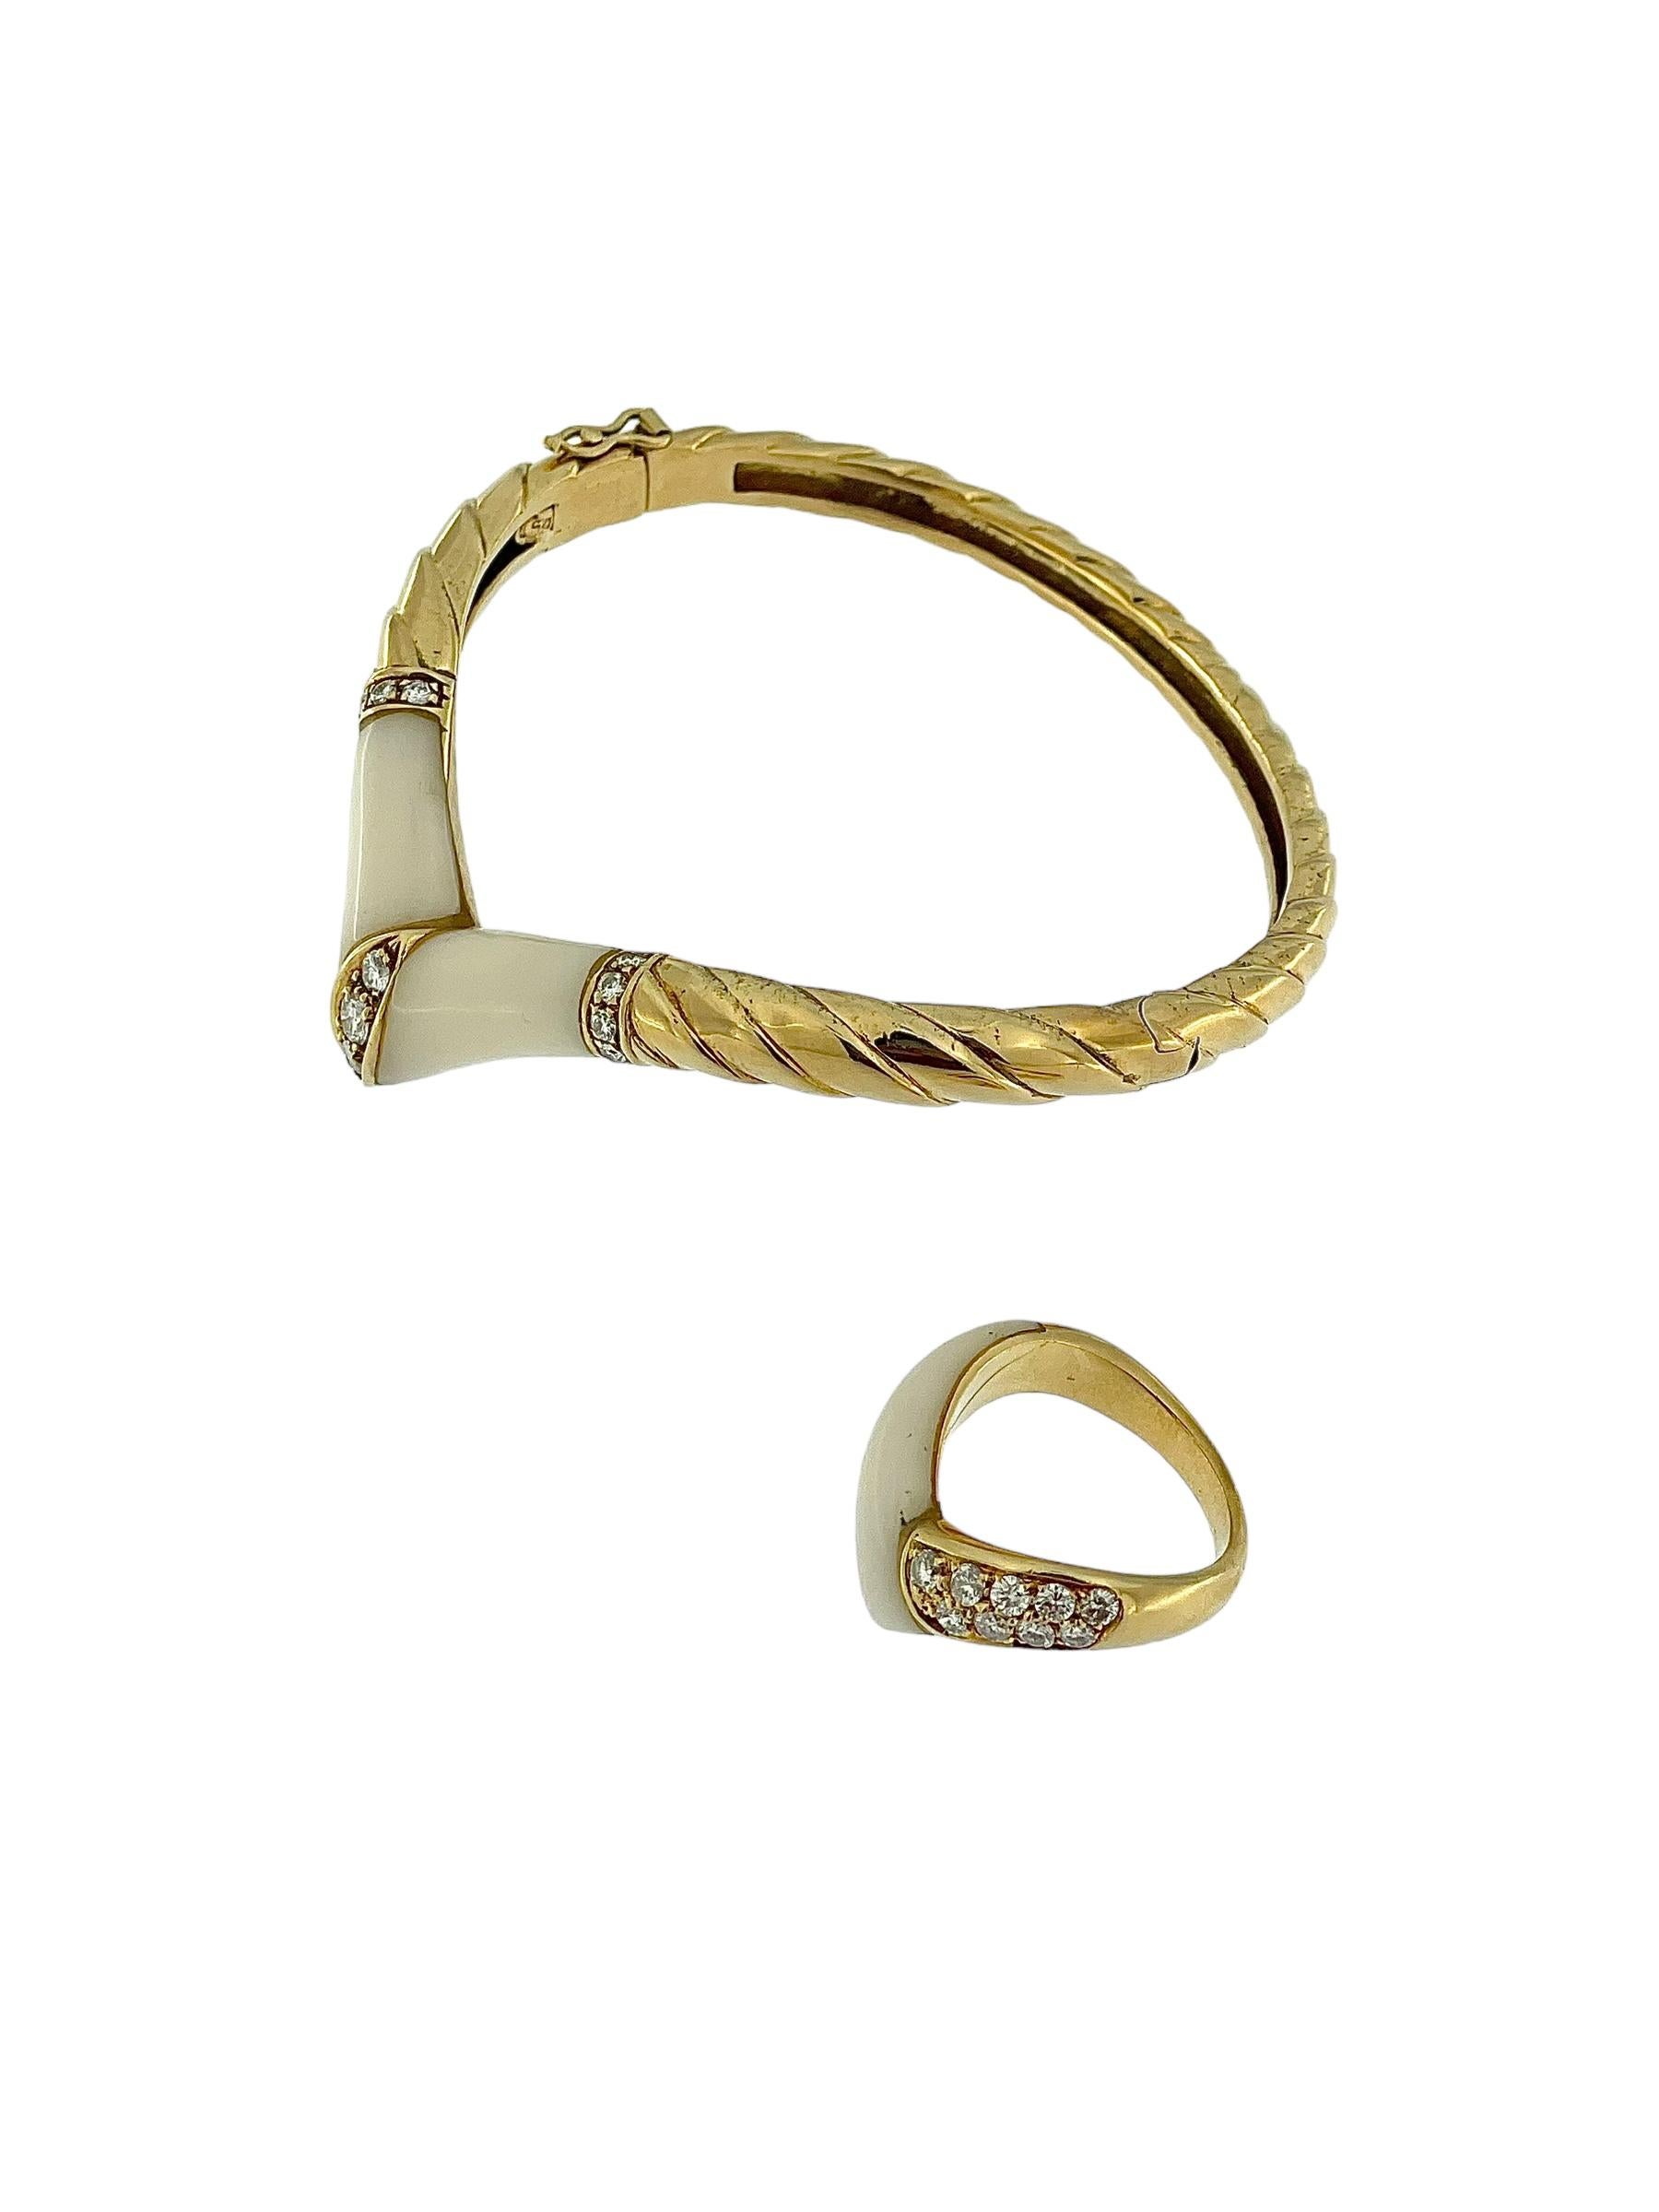 HRD Certified Gold Set Bracelet and Ring with Diamonds and Ivory For Sale 1